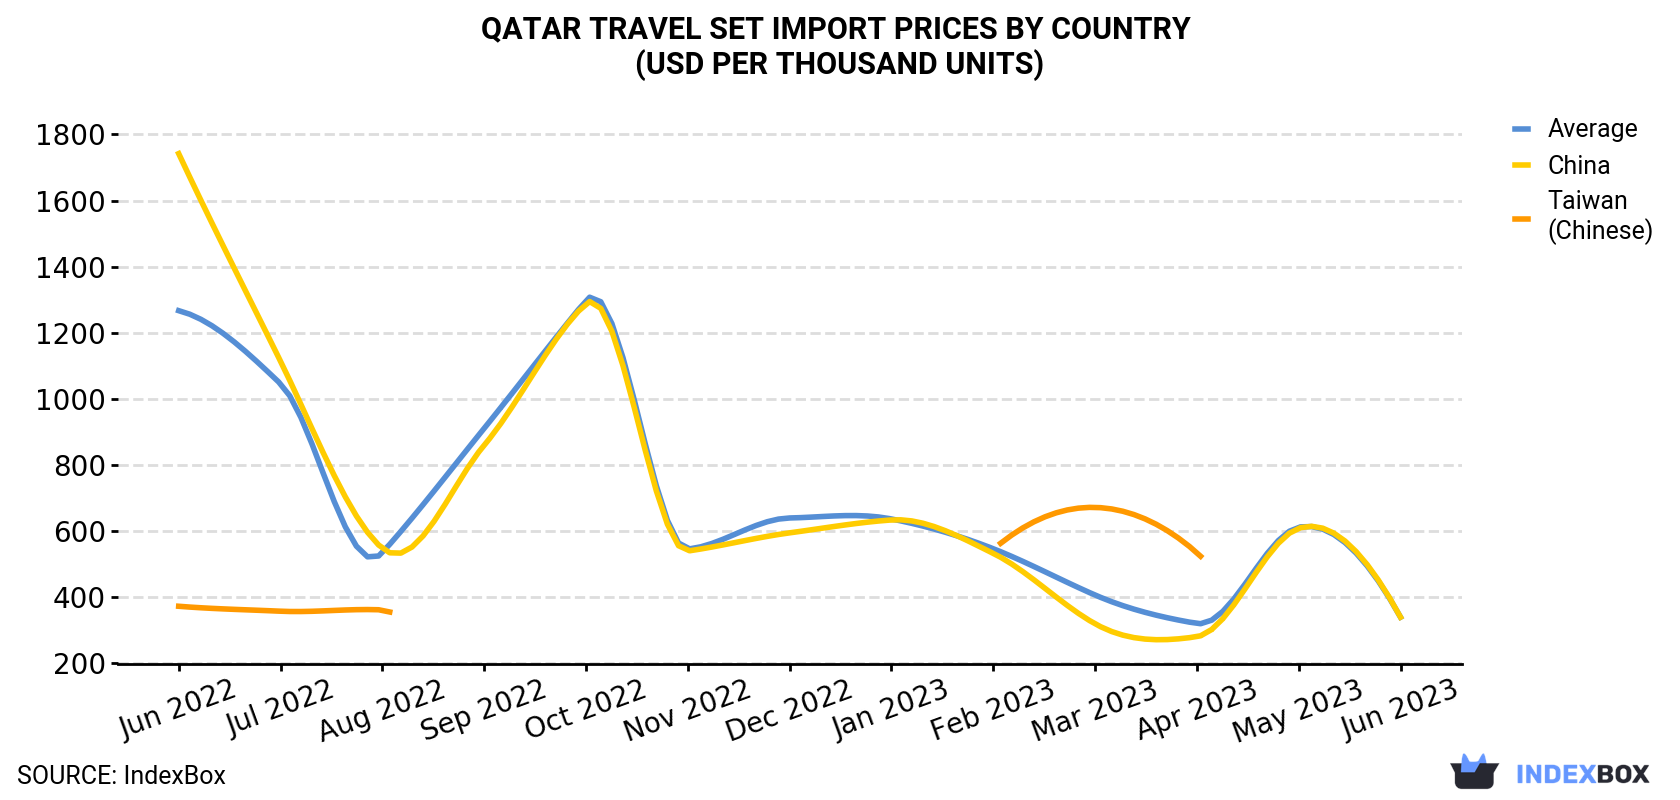 Qatar Travel Set Import Prices By Country (USD Per Thousand Units)